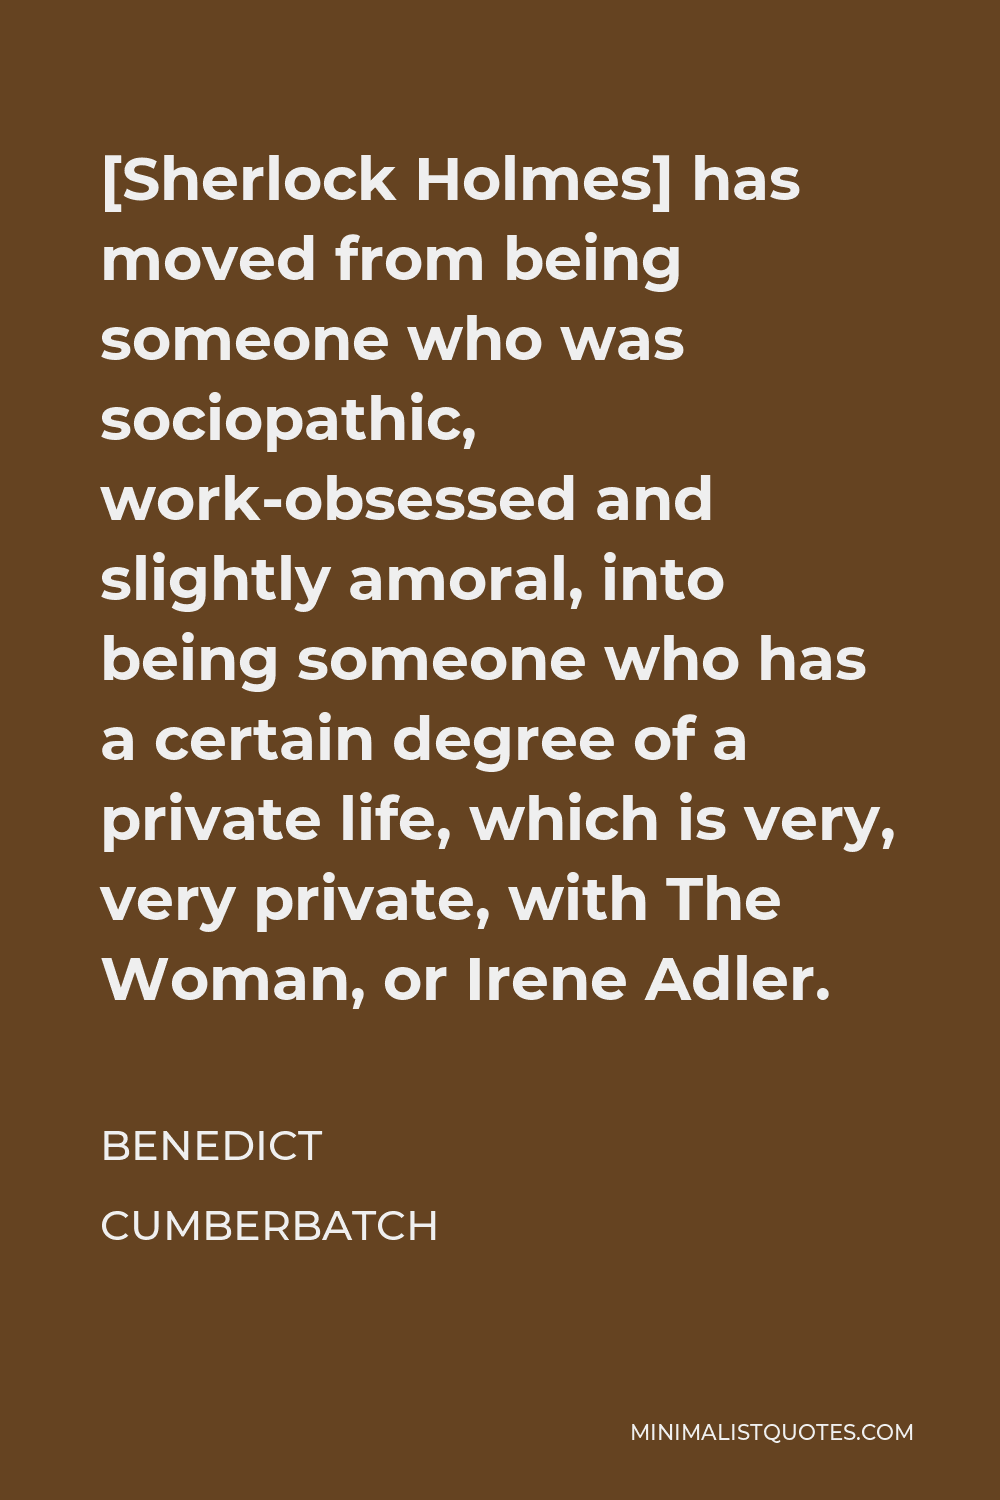 Benedict Cumberbatch Quote - [Sherlock Holmes] has moved from being someone who was sociopathic, work-obsessed and slightly amoral, into being someone who has a certain degree of a private life, which is very, very private, with The Woman, or Irene Adler.